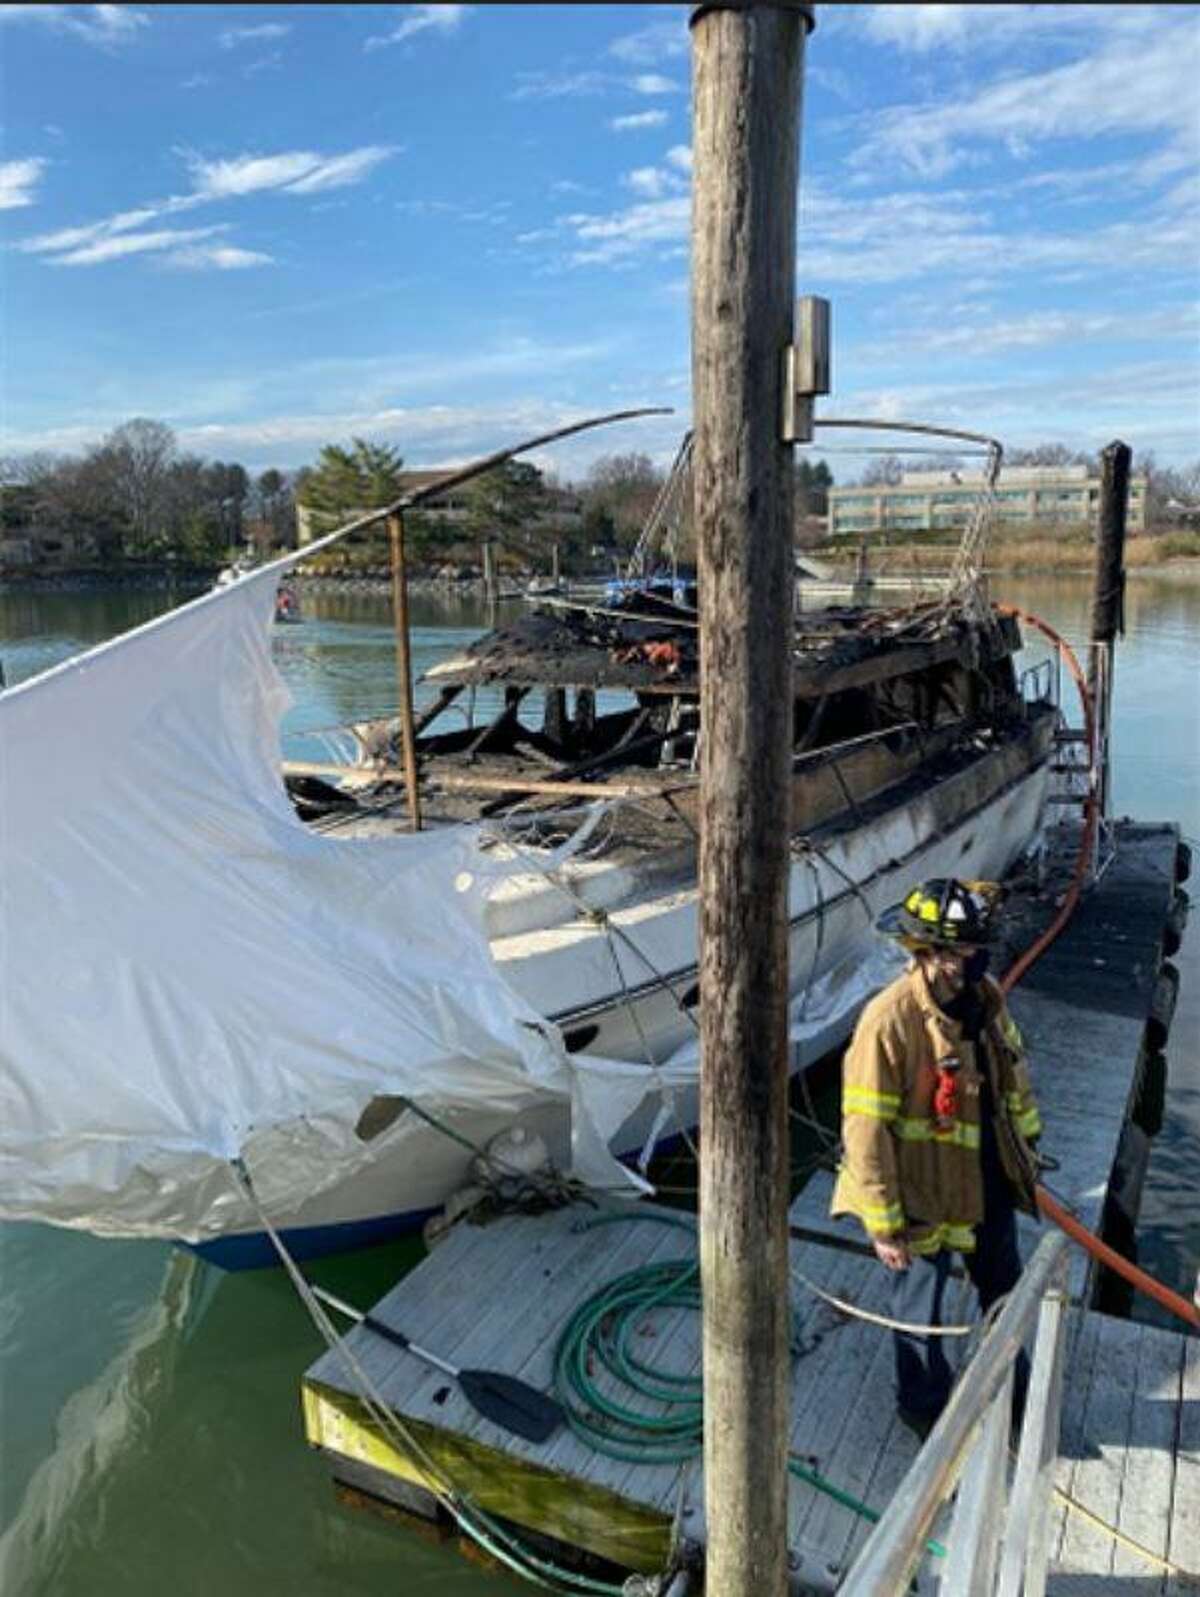 Fire officials respond to a boat fire at Dolphin Cove on Saturday afternoon.